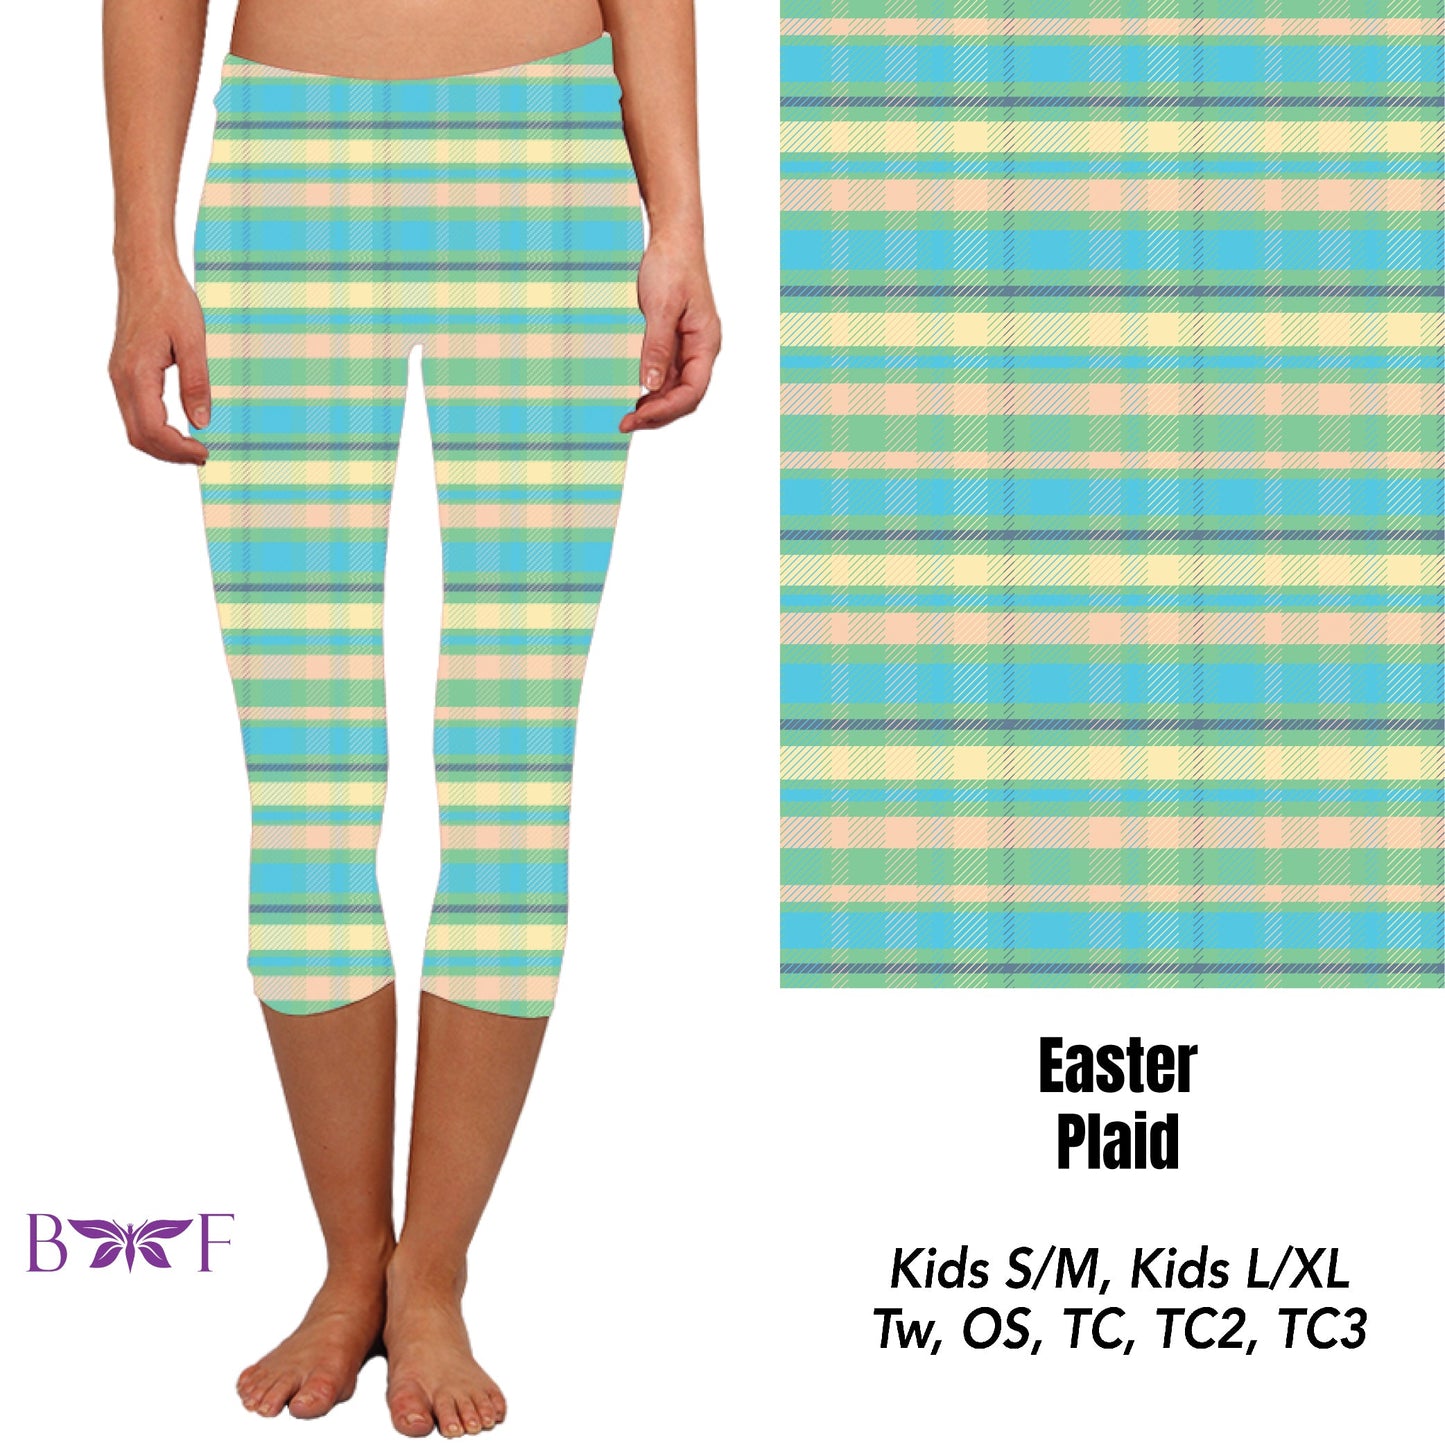 Easter Plaid jogger and skorts